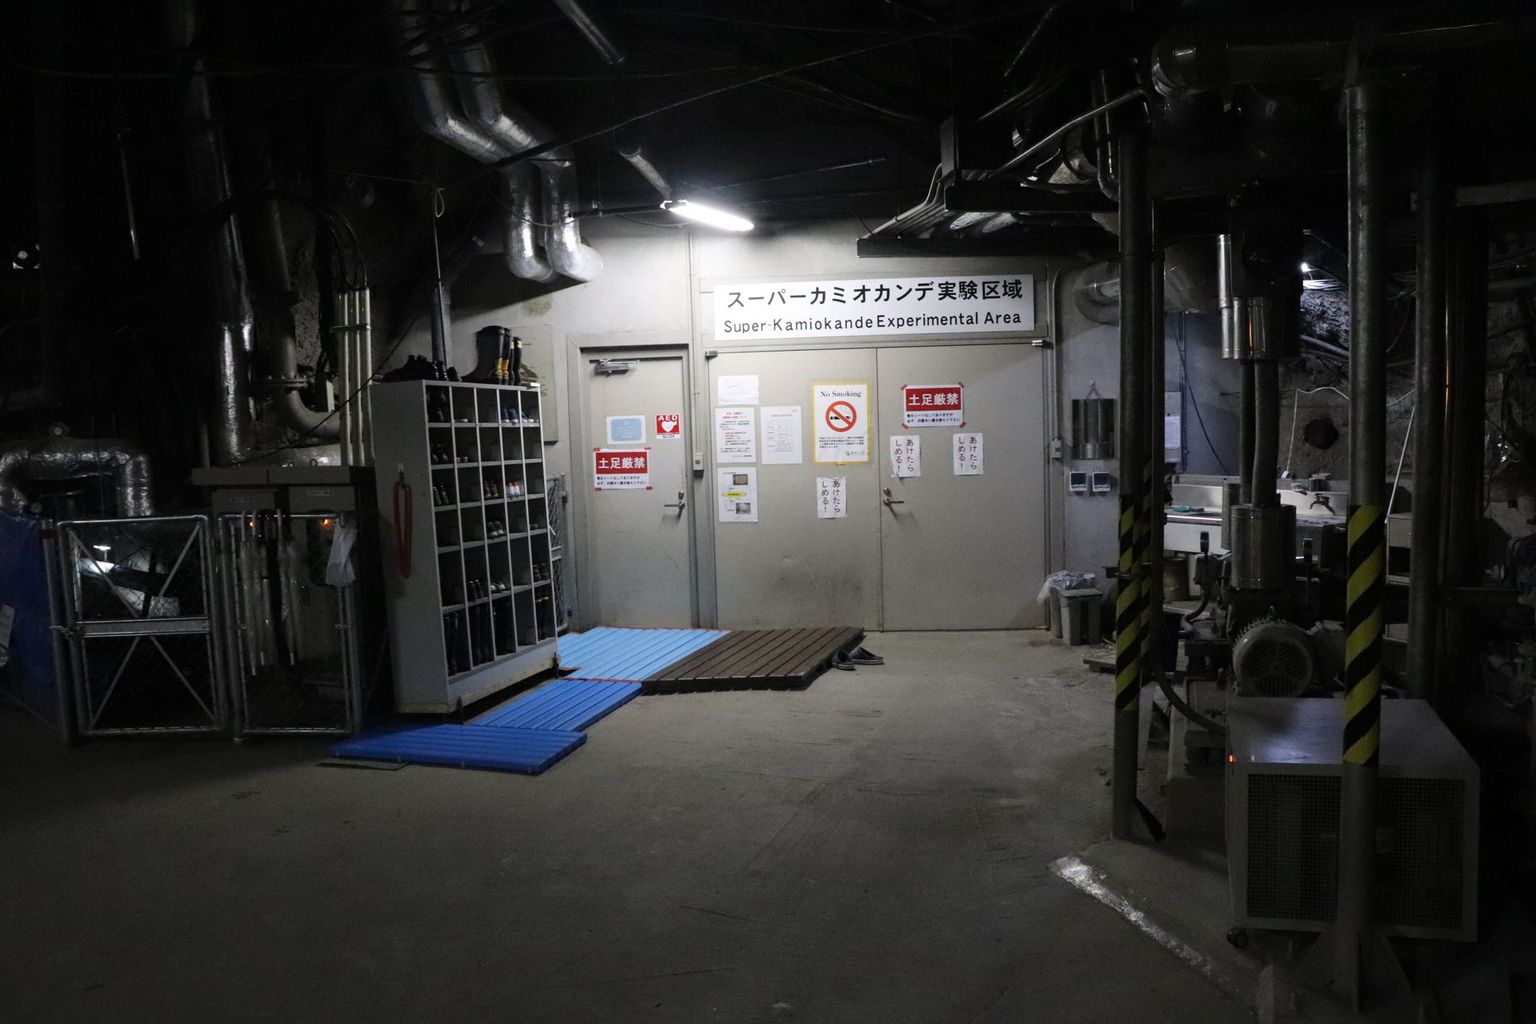 The entrance to the Super-Kamiokande detector. As always, when you enter a room in Japan, you have to take off your shoes (and stow them in the shelf on the left). Photo: B. Vogel